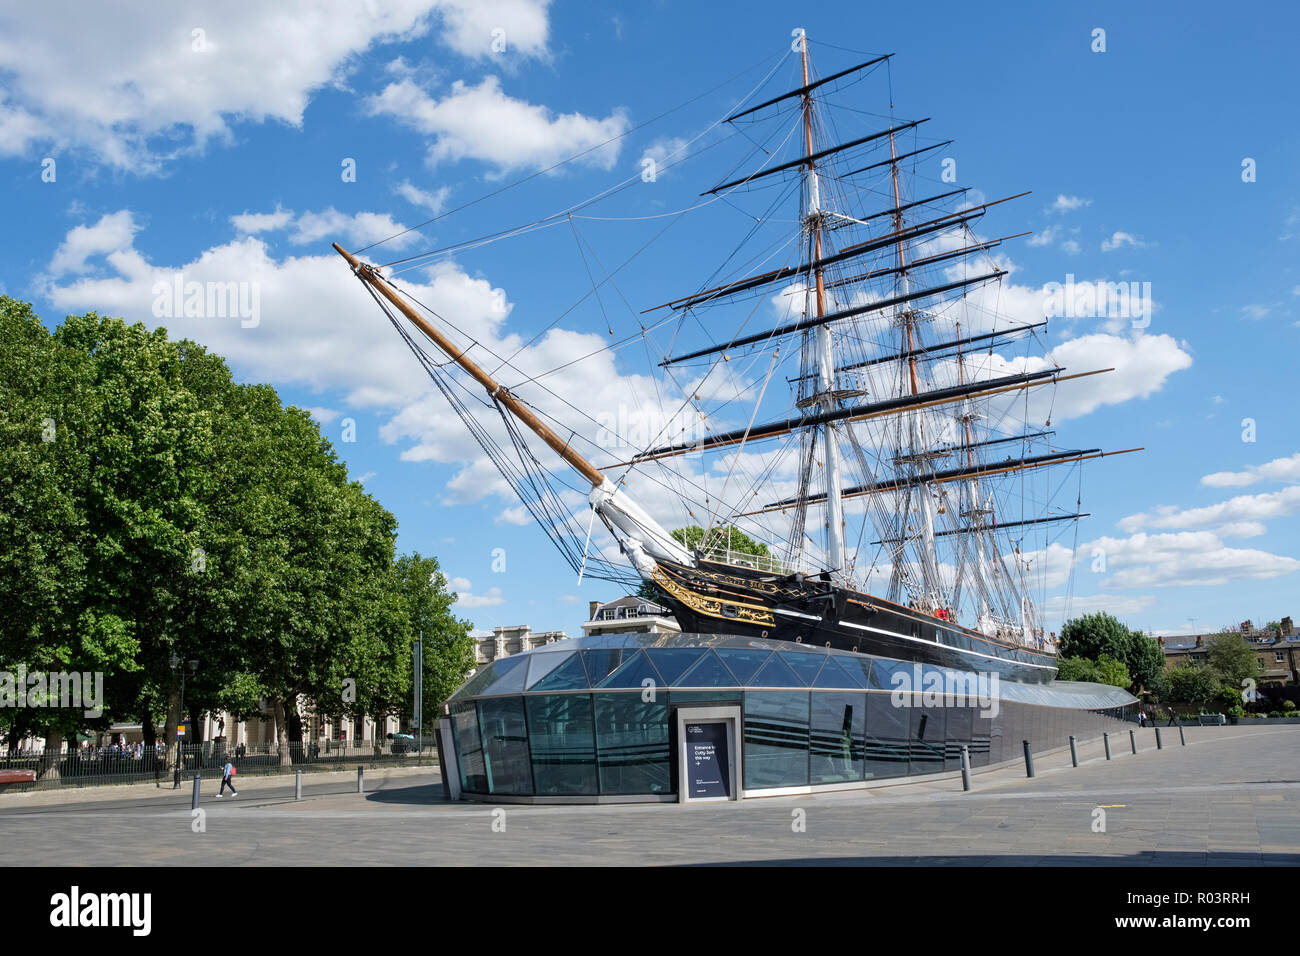 The Cutty Sark, historic  British clipper ship, in permanent dry dock at Greenwich, London, England, UK Stock Photo